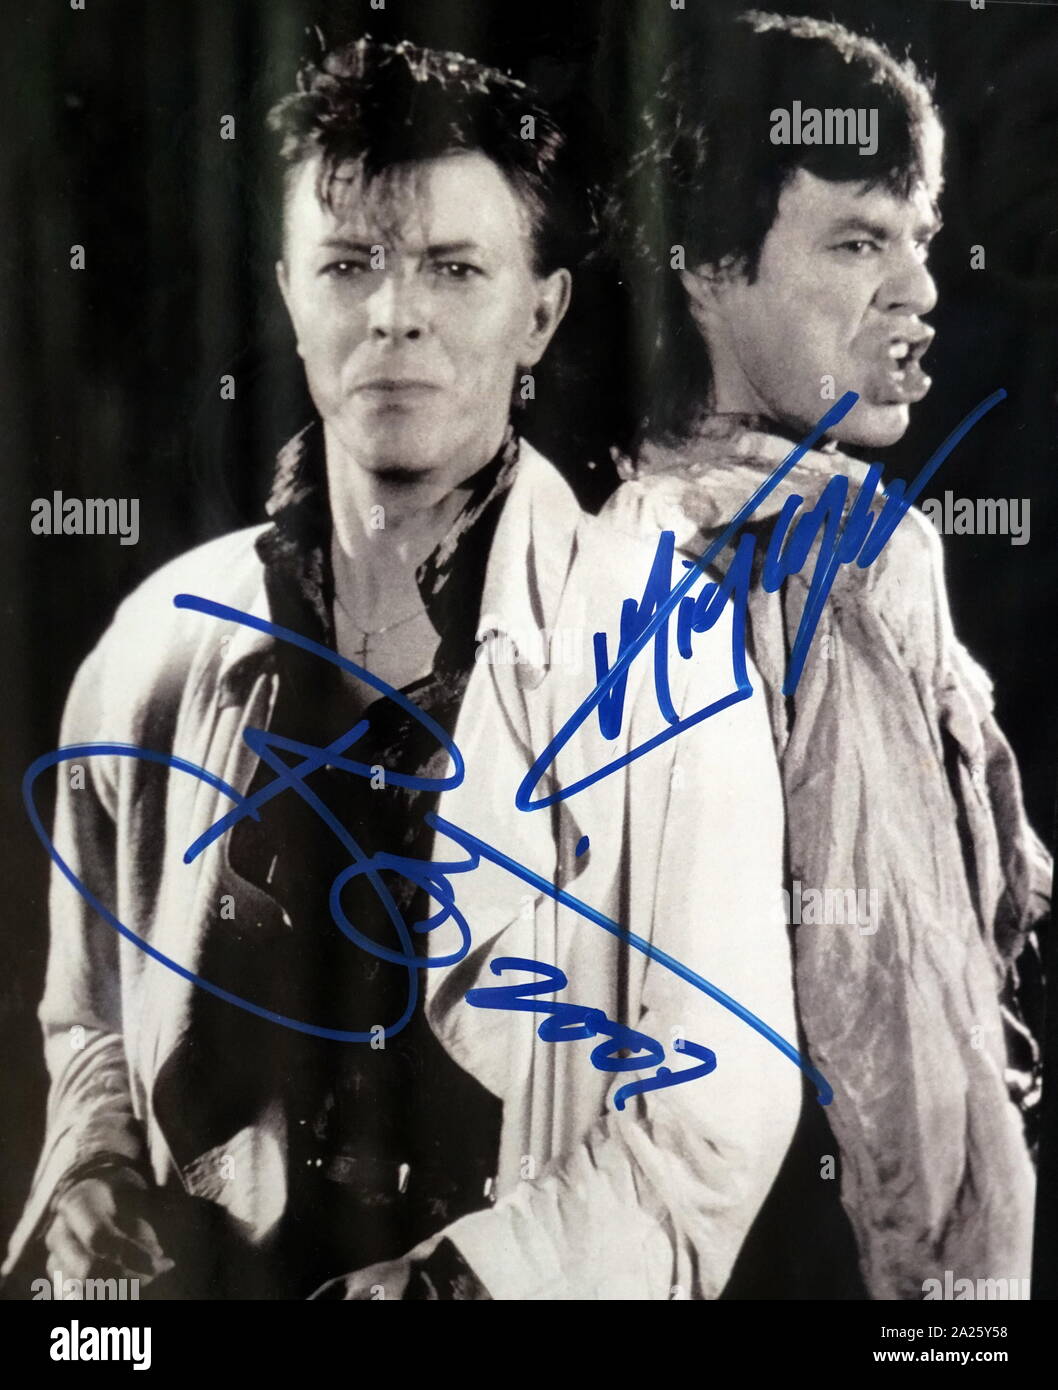 Signed photograph of David Bowie and Mick Jagger. David Robert Jones (1947-2016) an English singer, songwriter, and actor. Sir Michael Philip Jagger (1943-) an English singer, songwriter, actor and film producer. Stock Photo